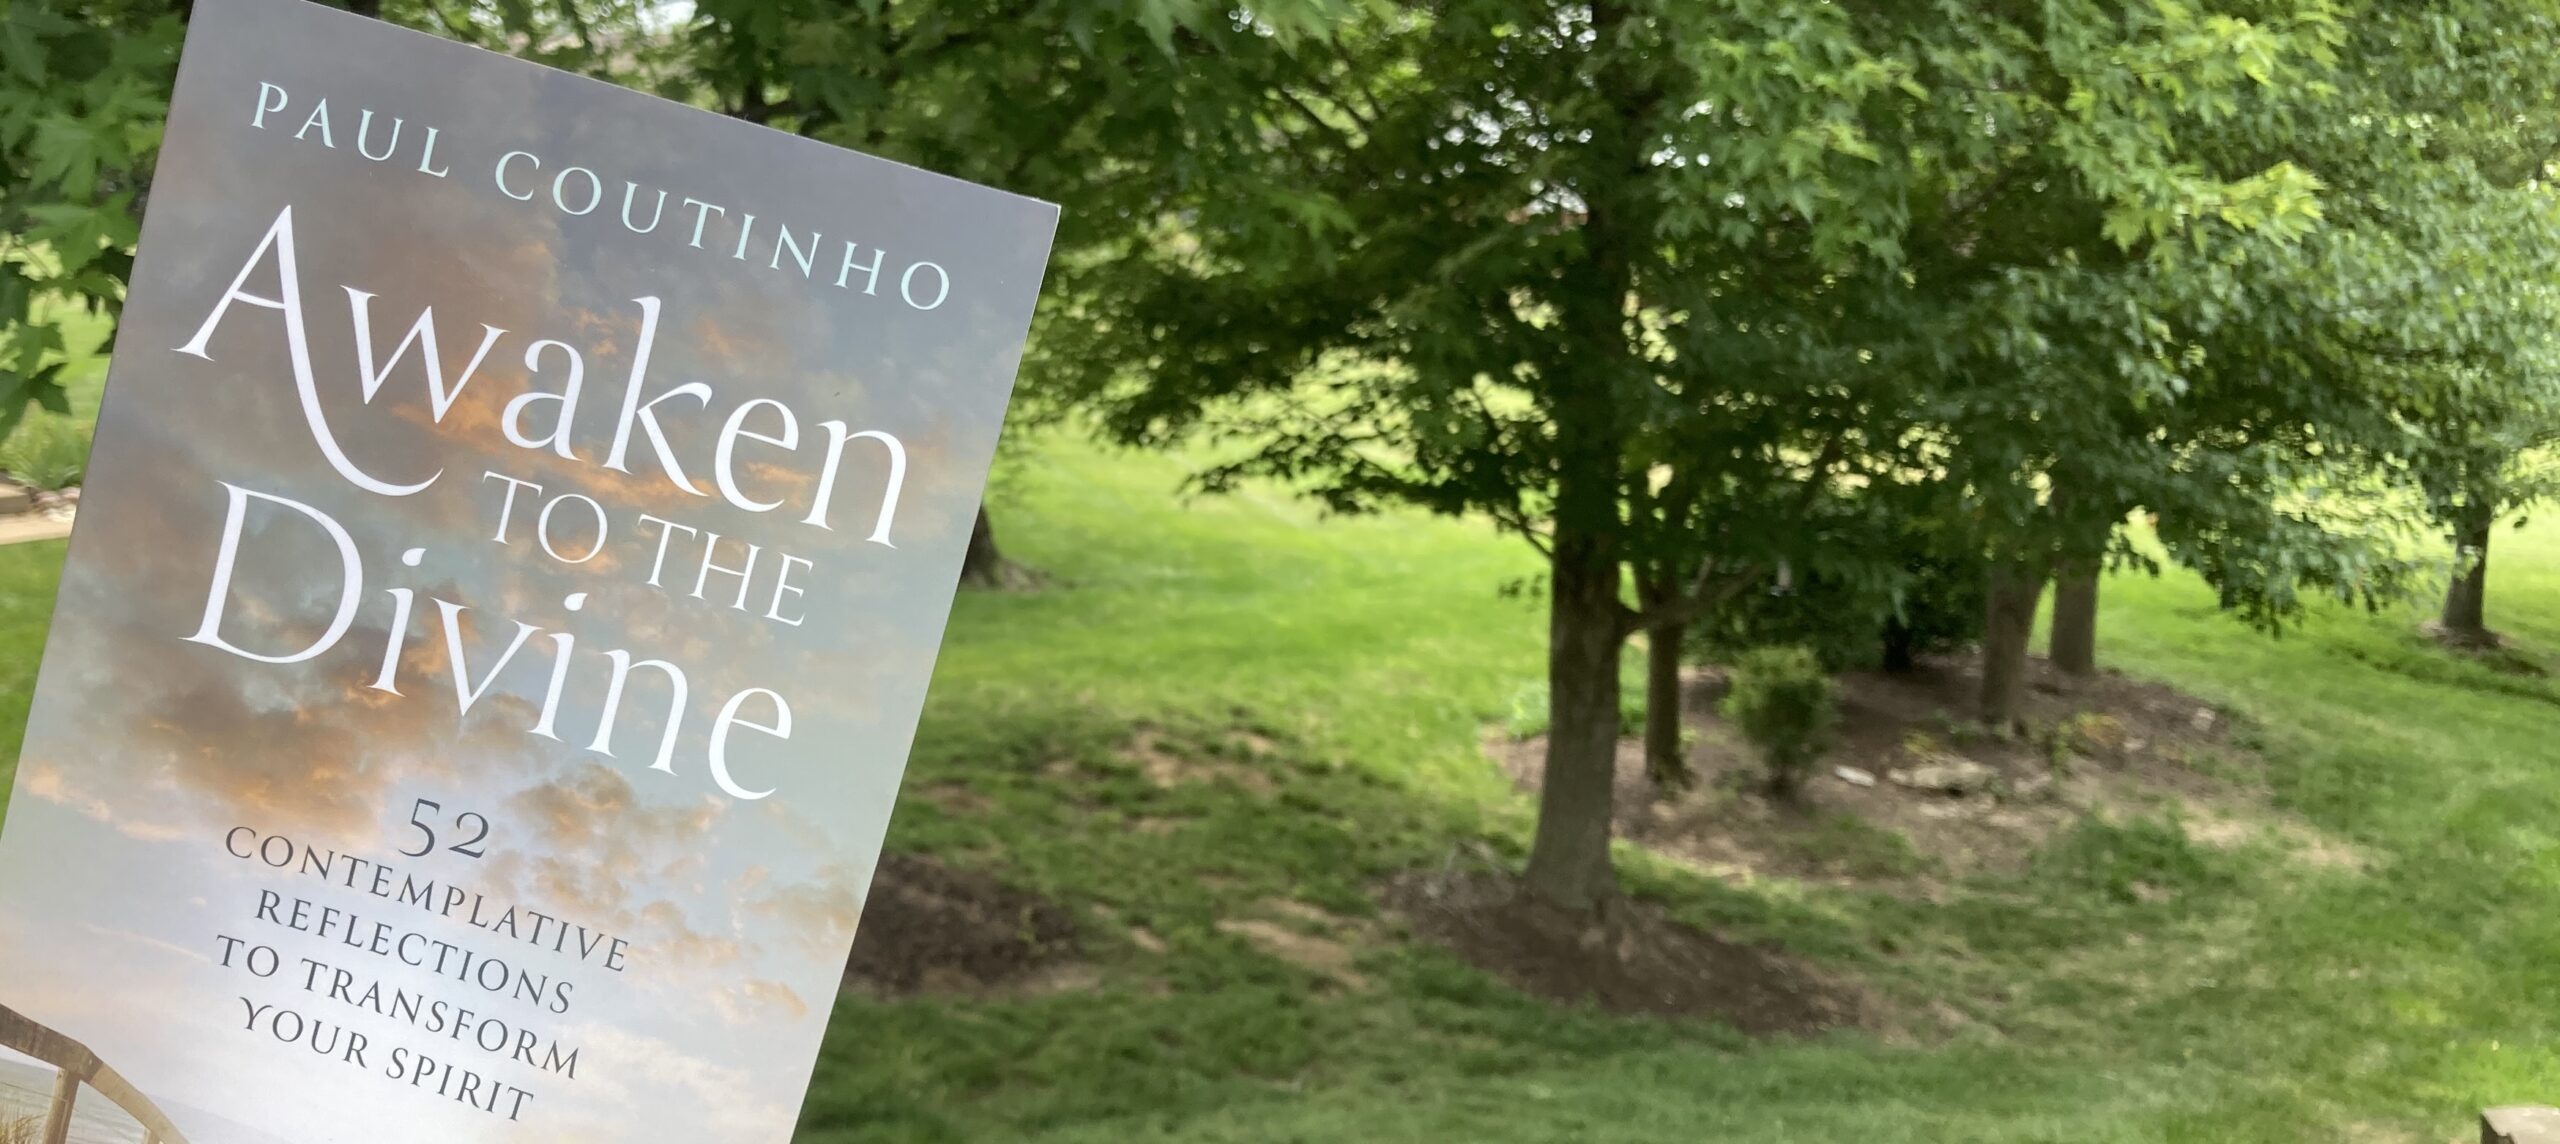 Book Review: Paul Coutinho’s “Awaken to the Divine” 